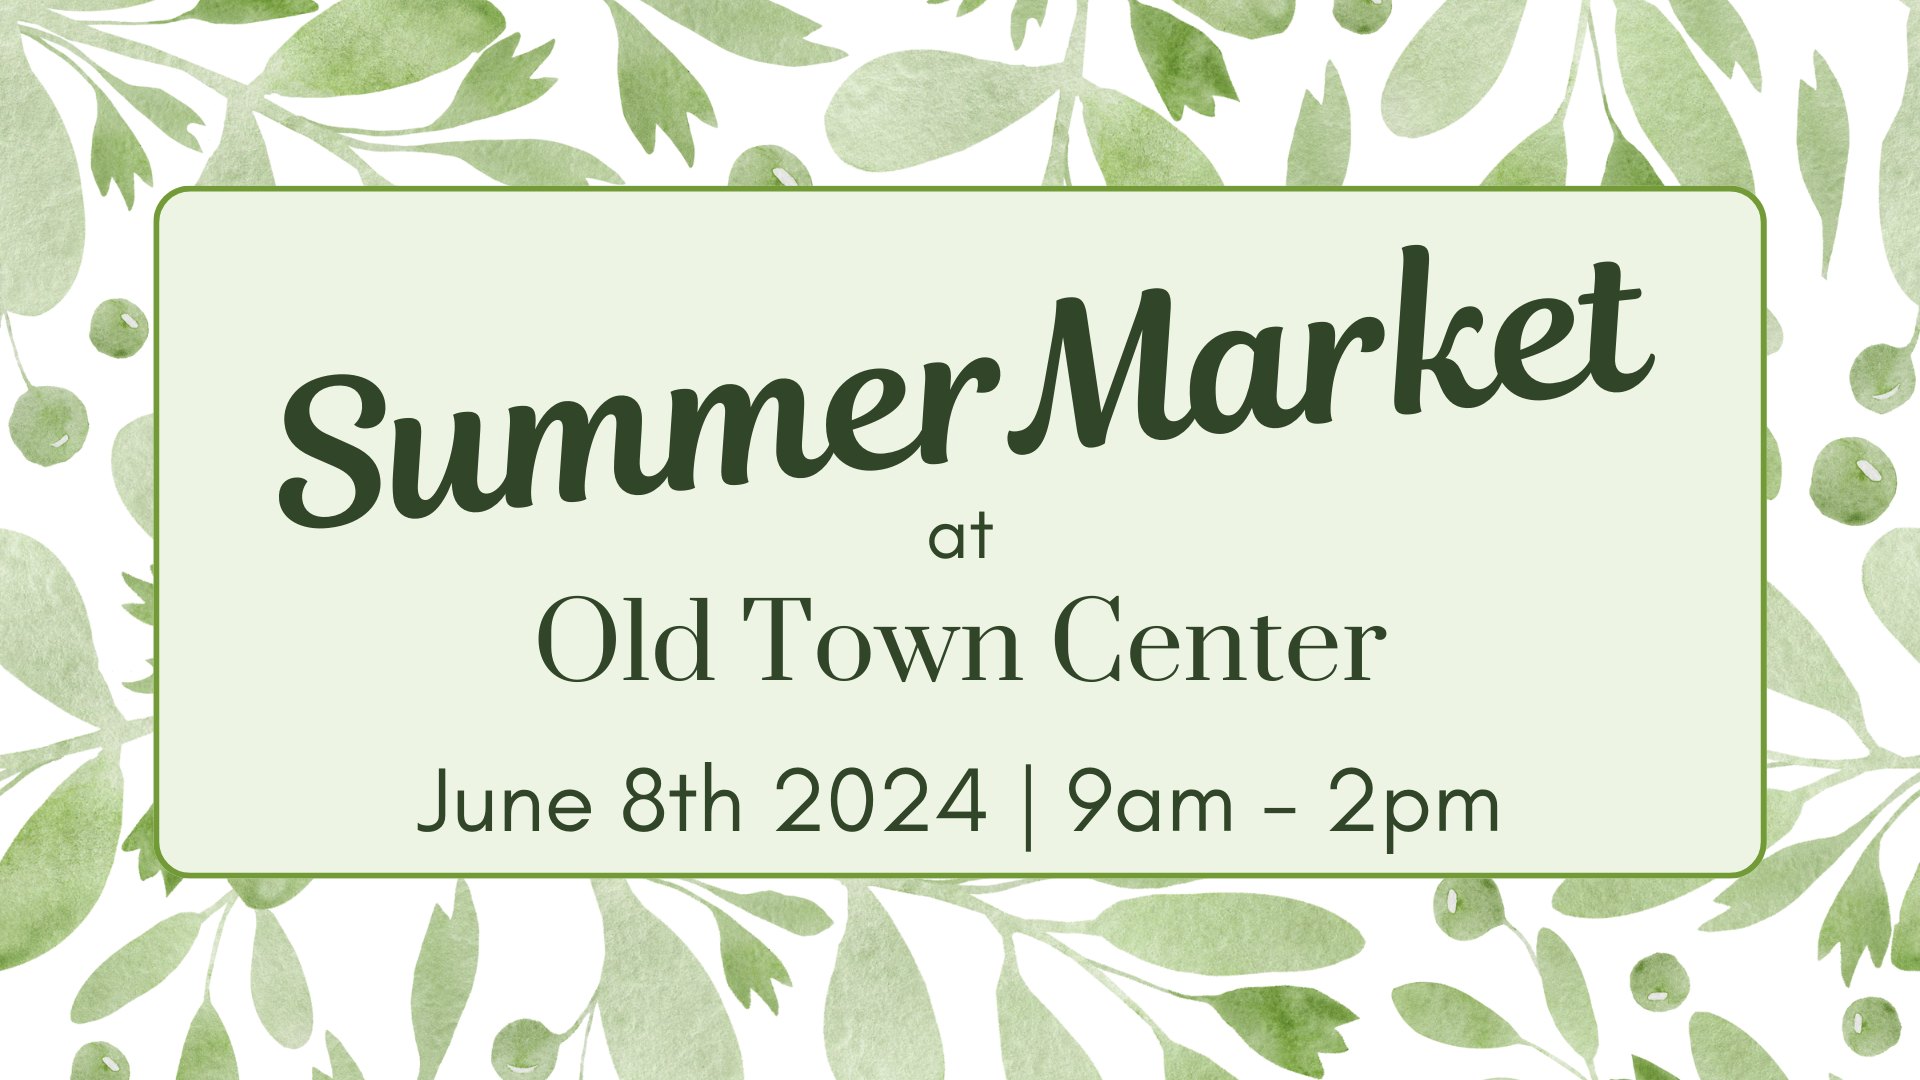 Summer Market at Old Town Center - June 8th, 2024